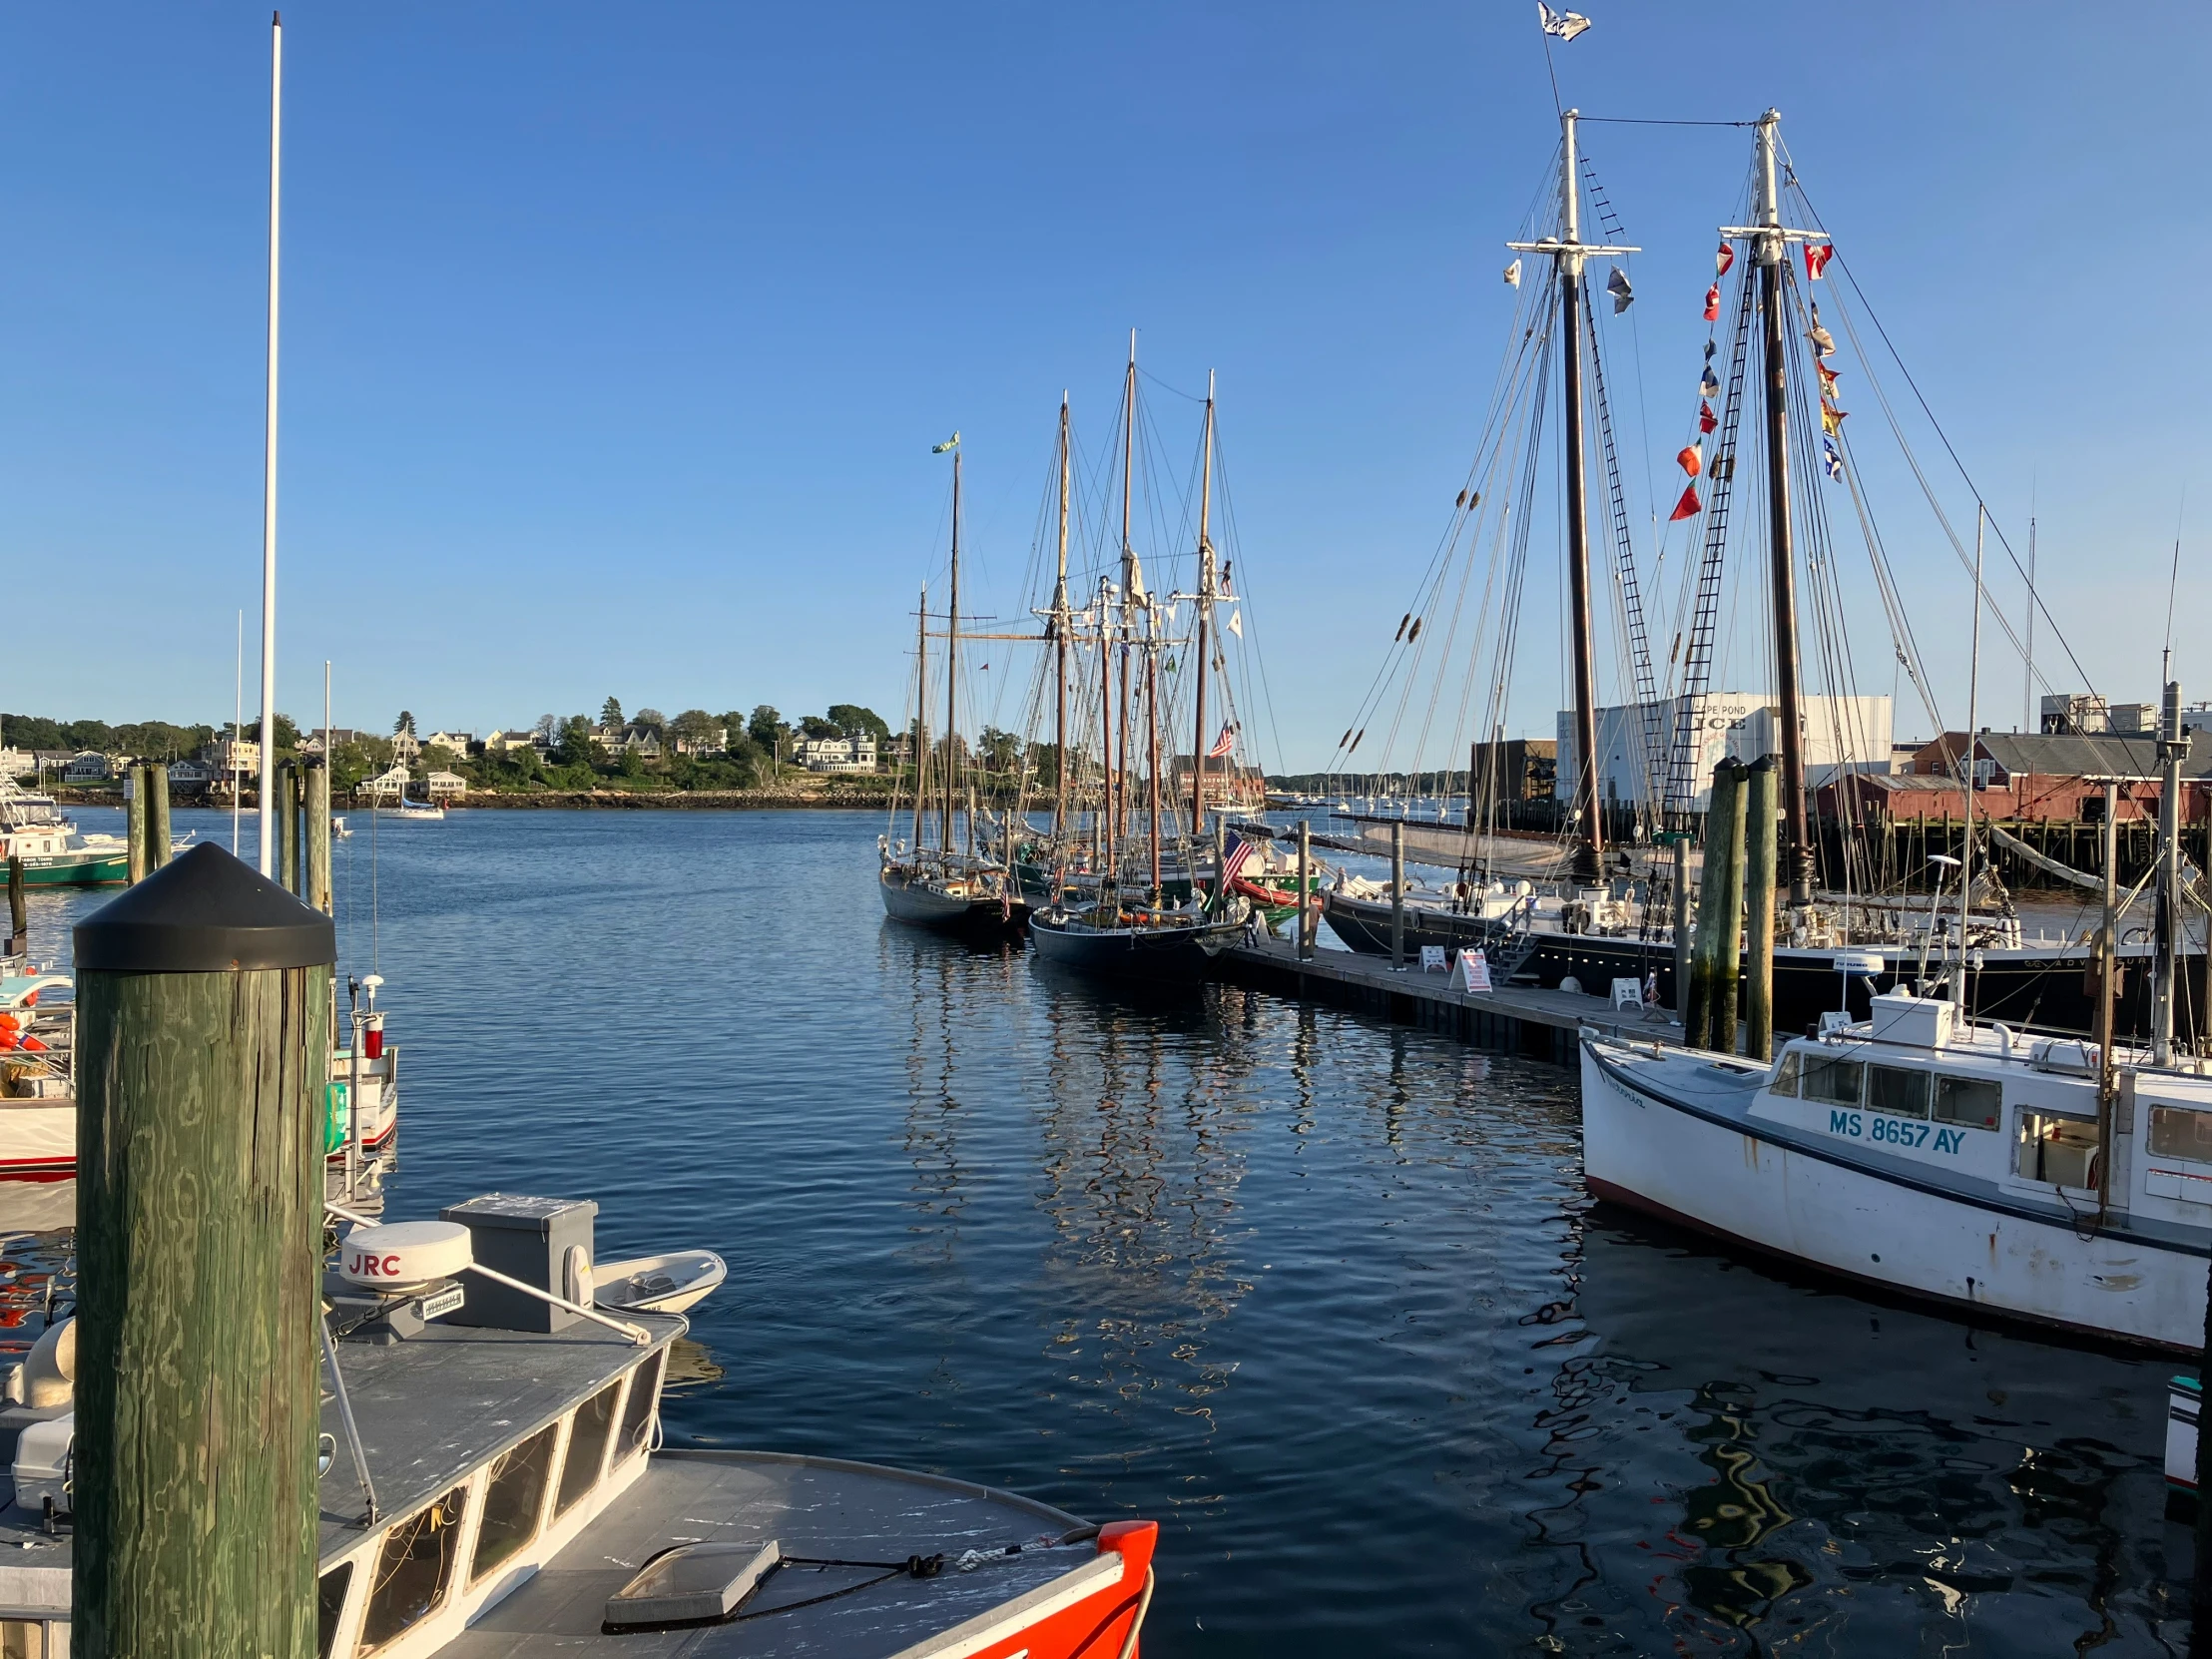 a group of sail boats docked in a marina